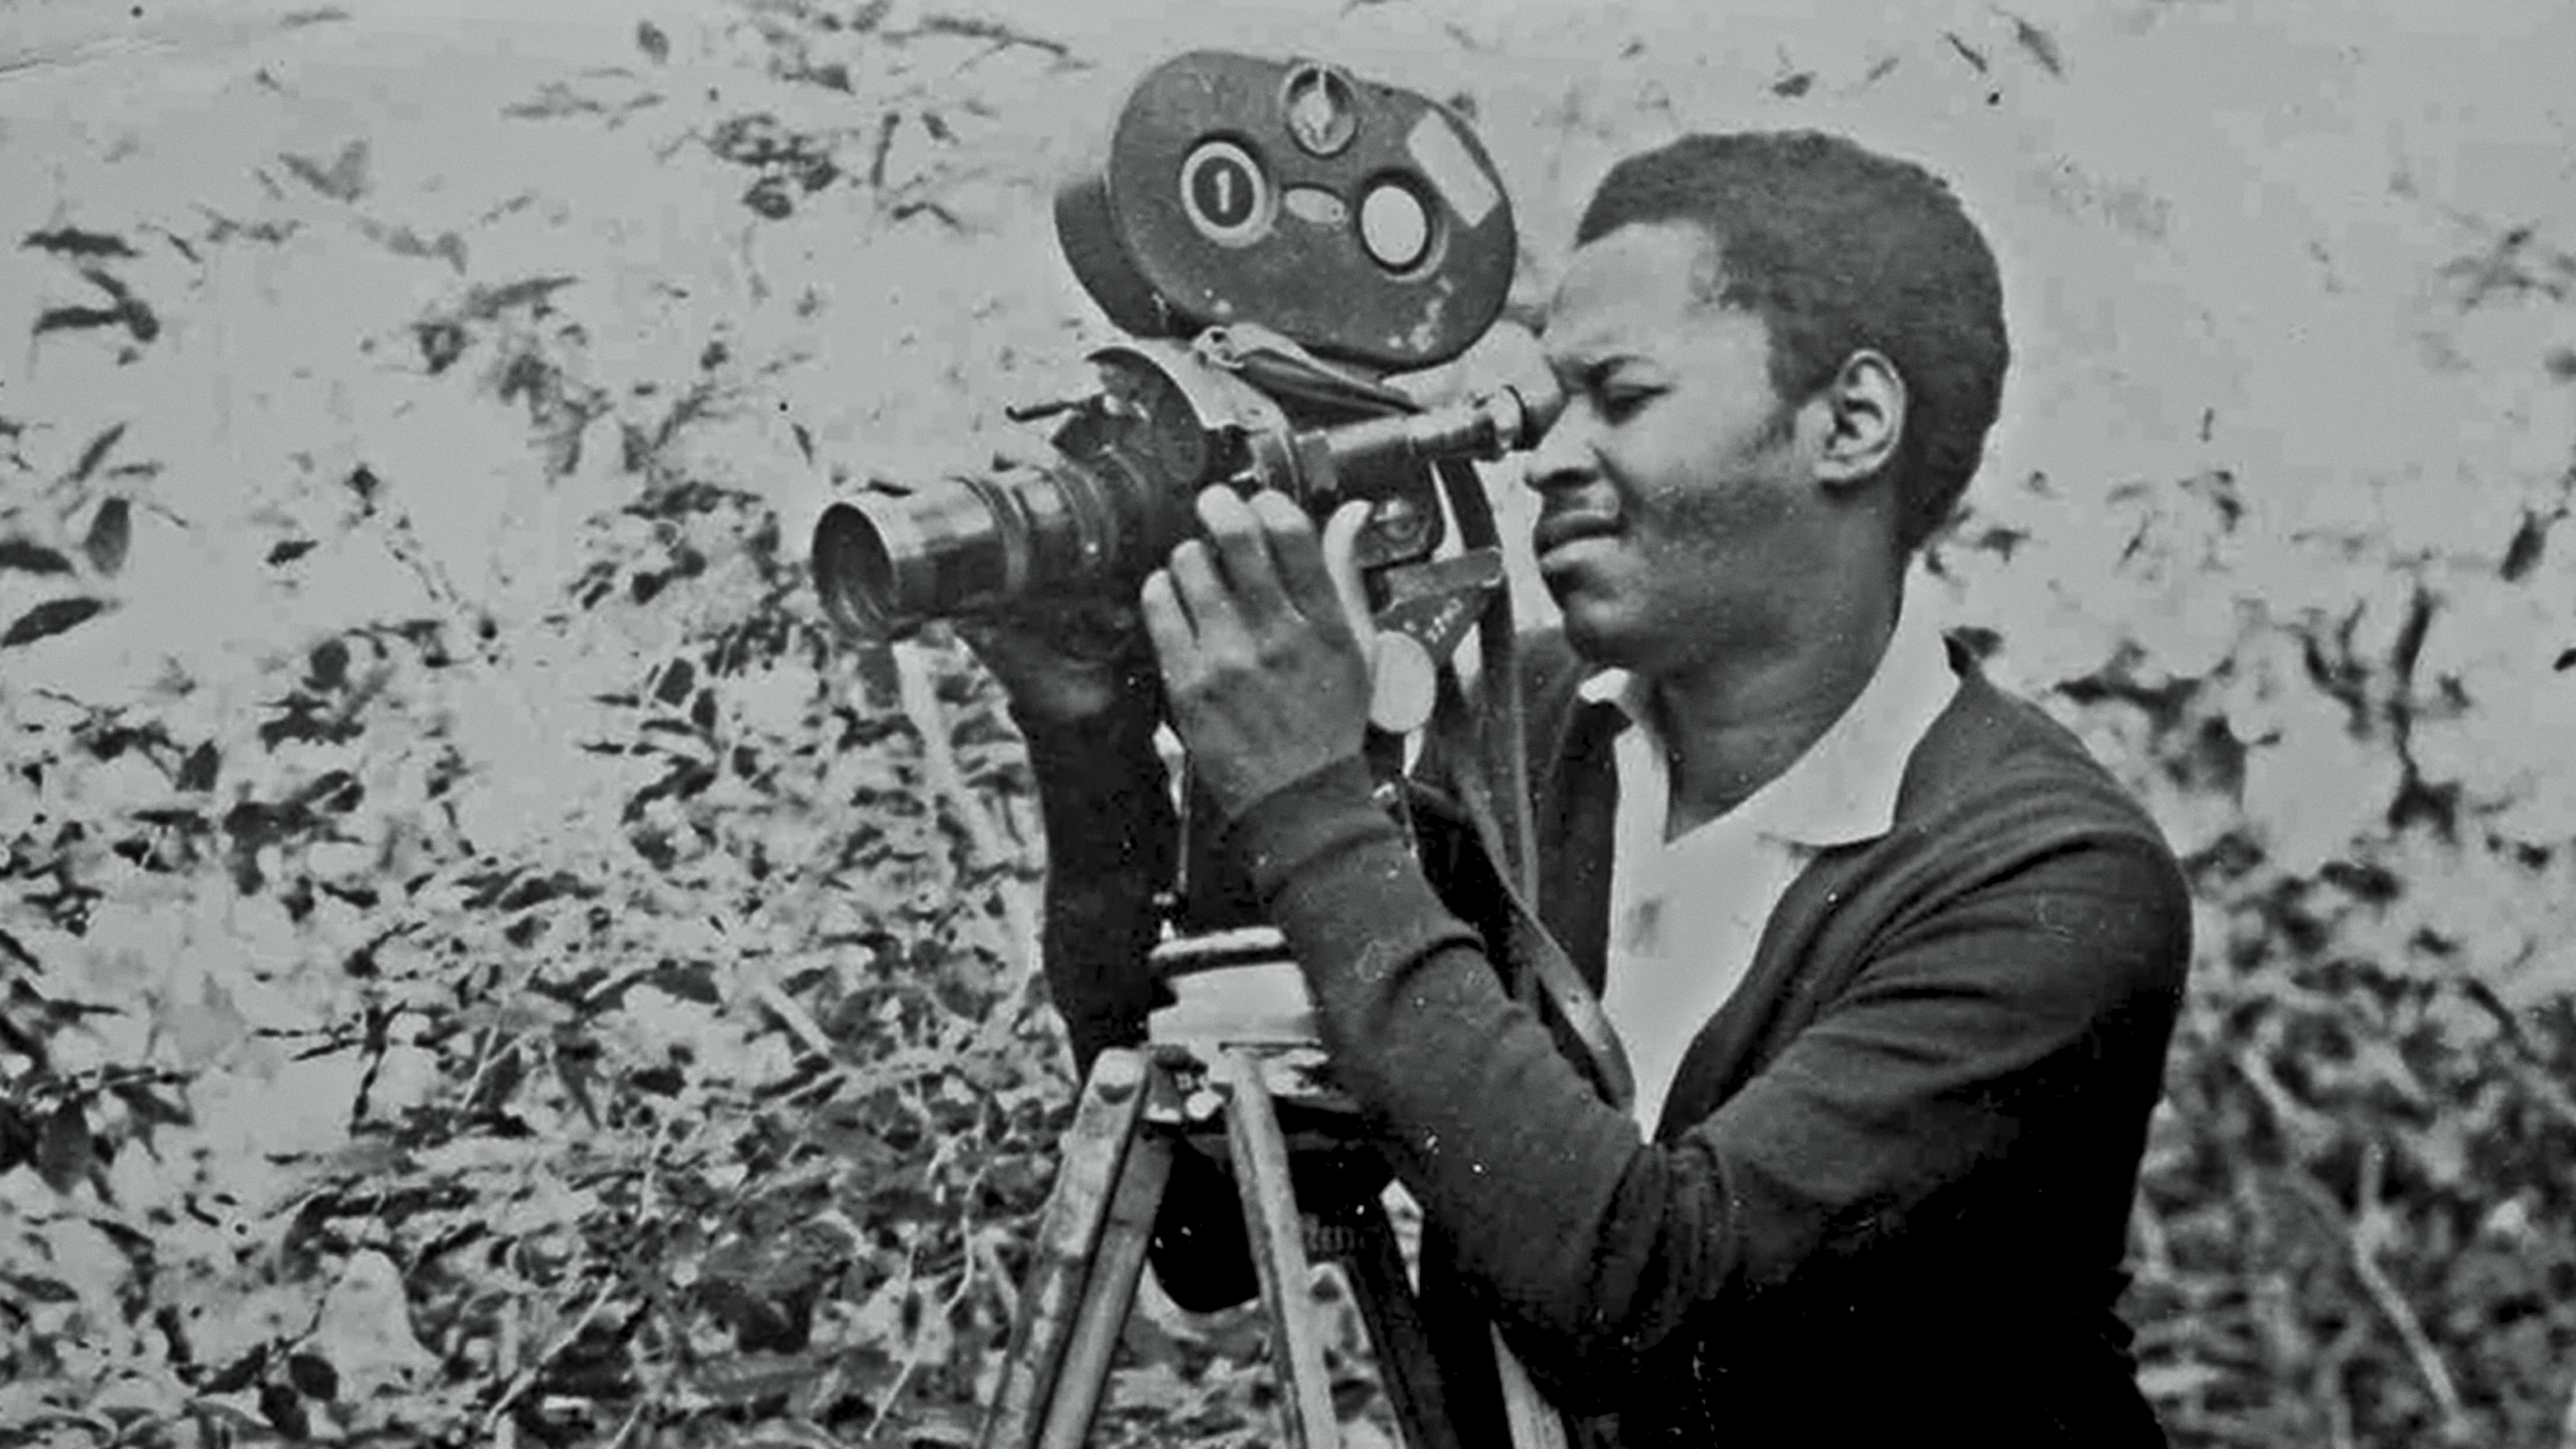 A man looks through the viewfinder of a camera on tripod.